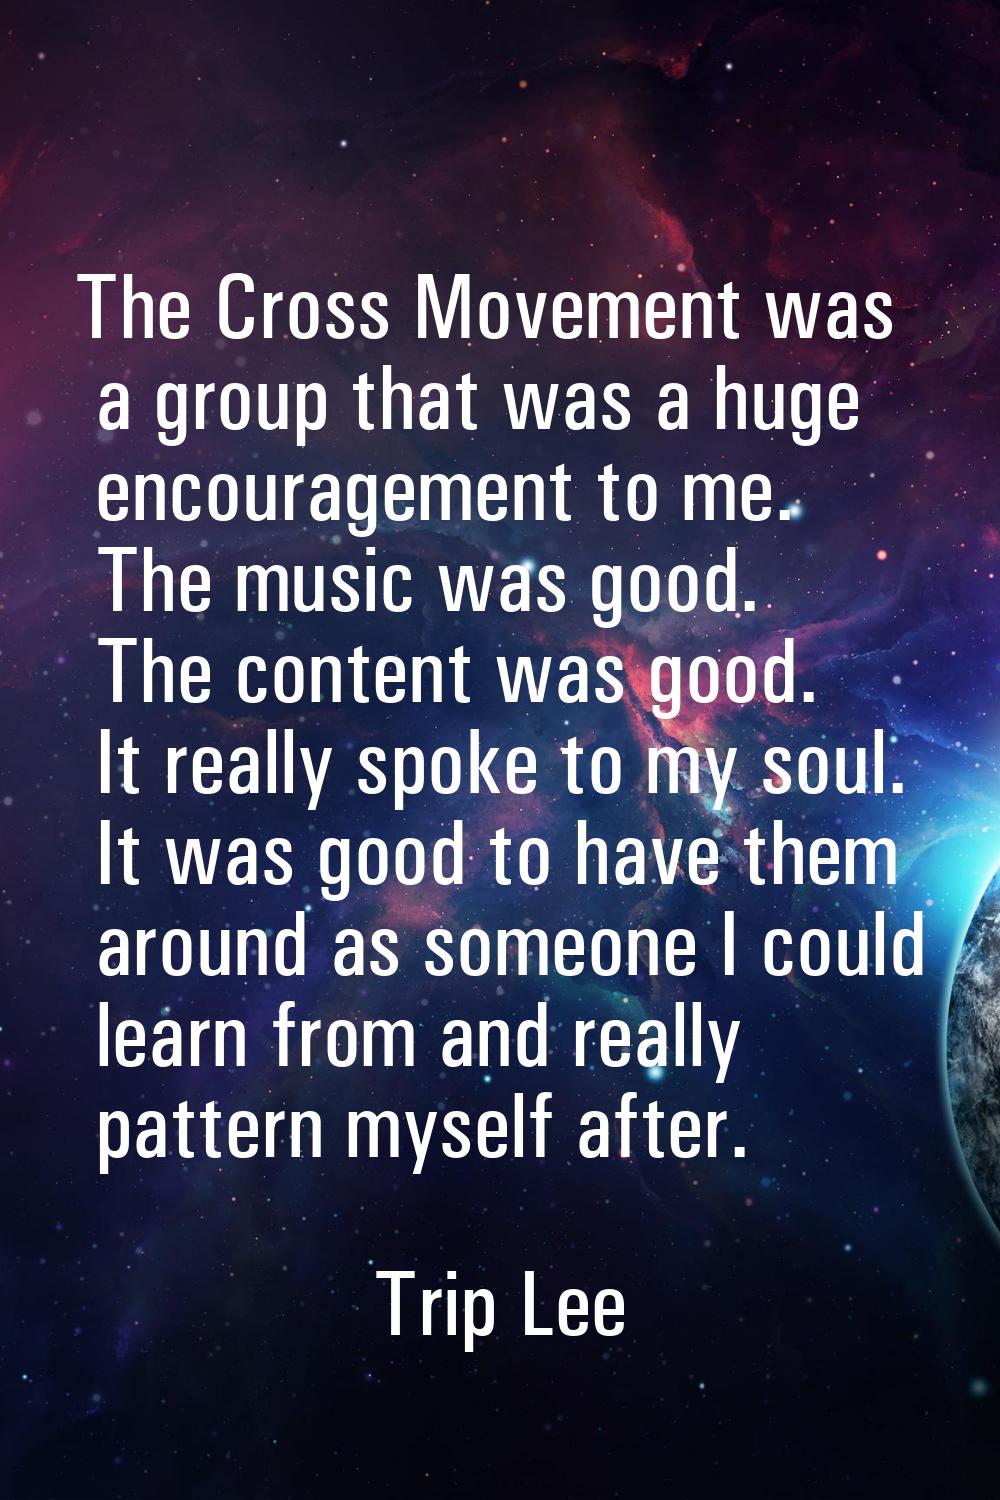 The Cross Movement was a group that was a huge encouragement to me. The music was good. The content